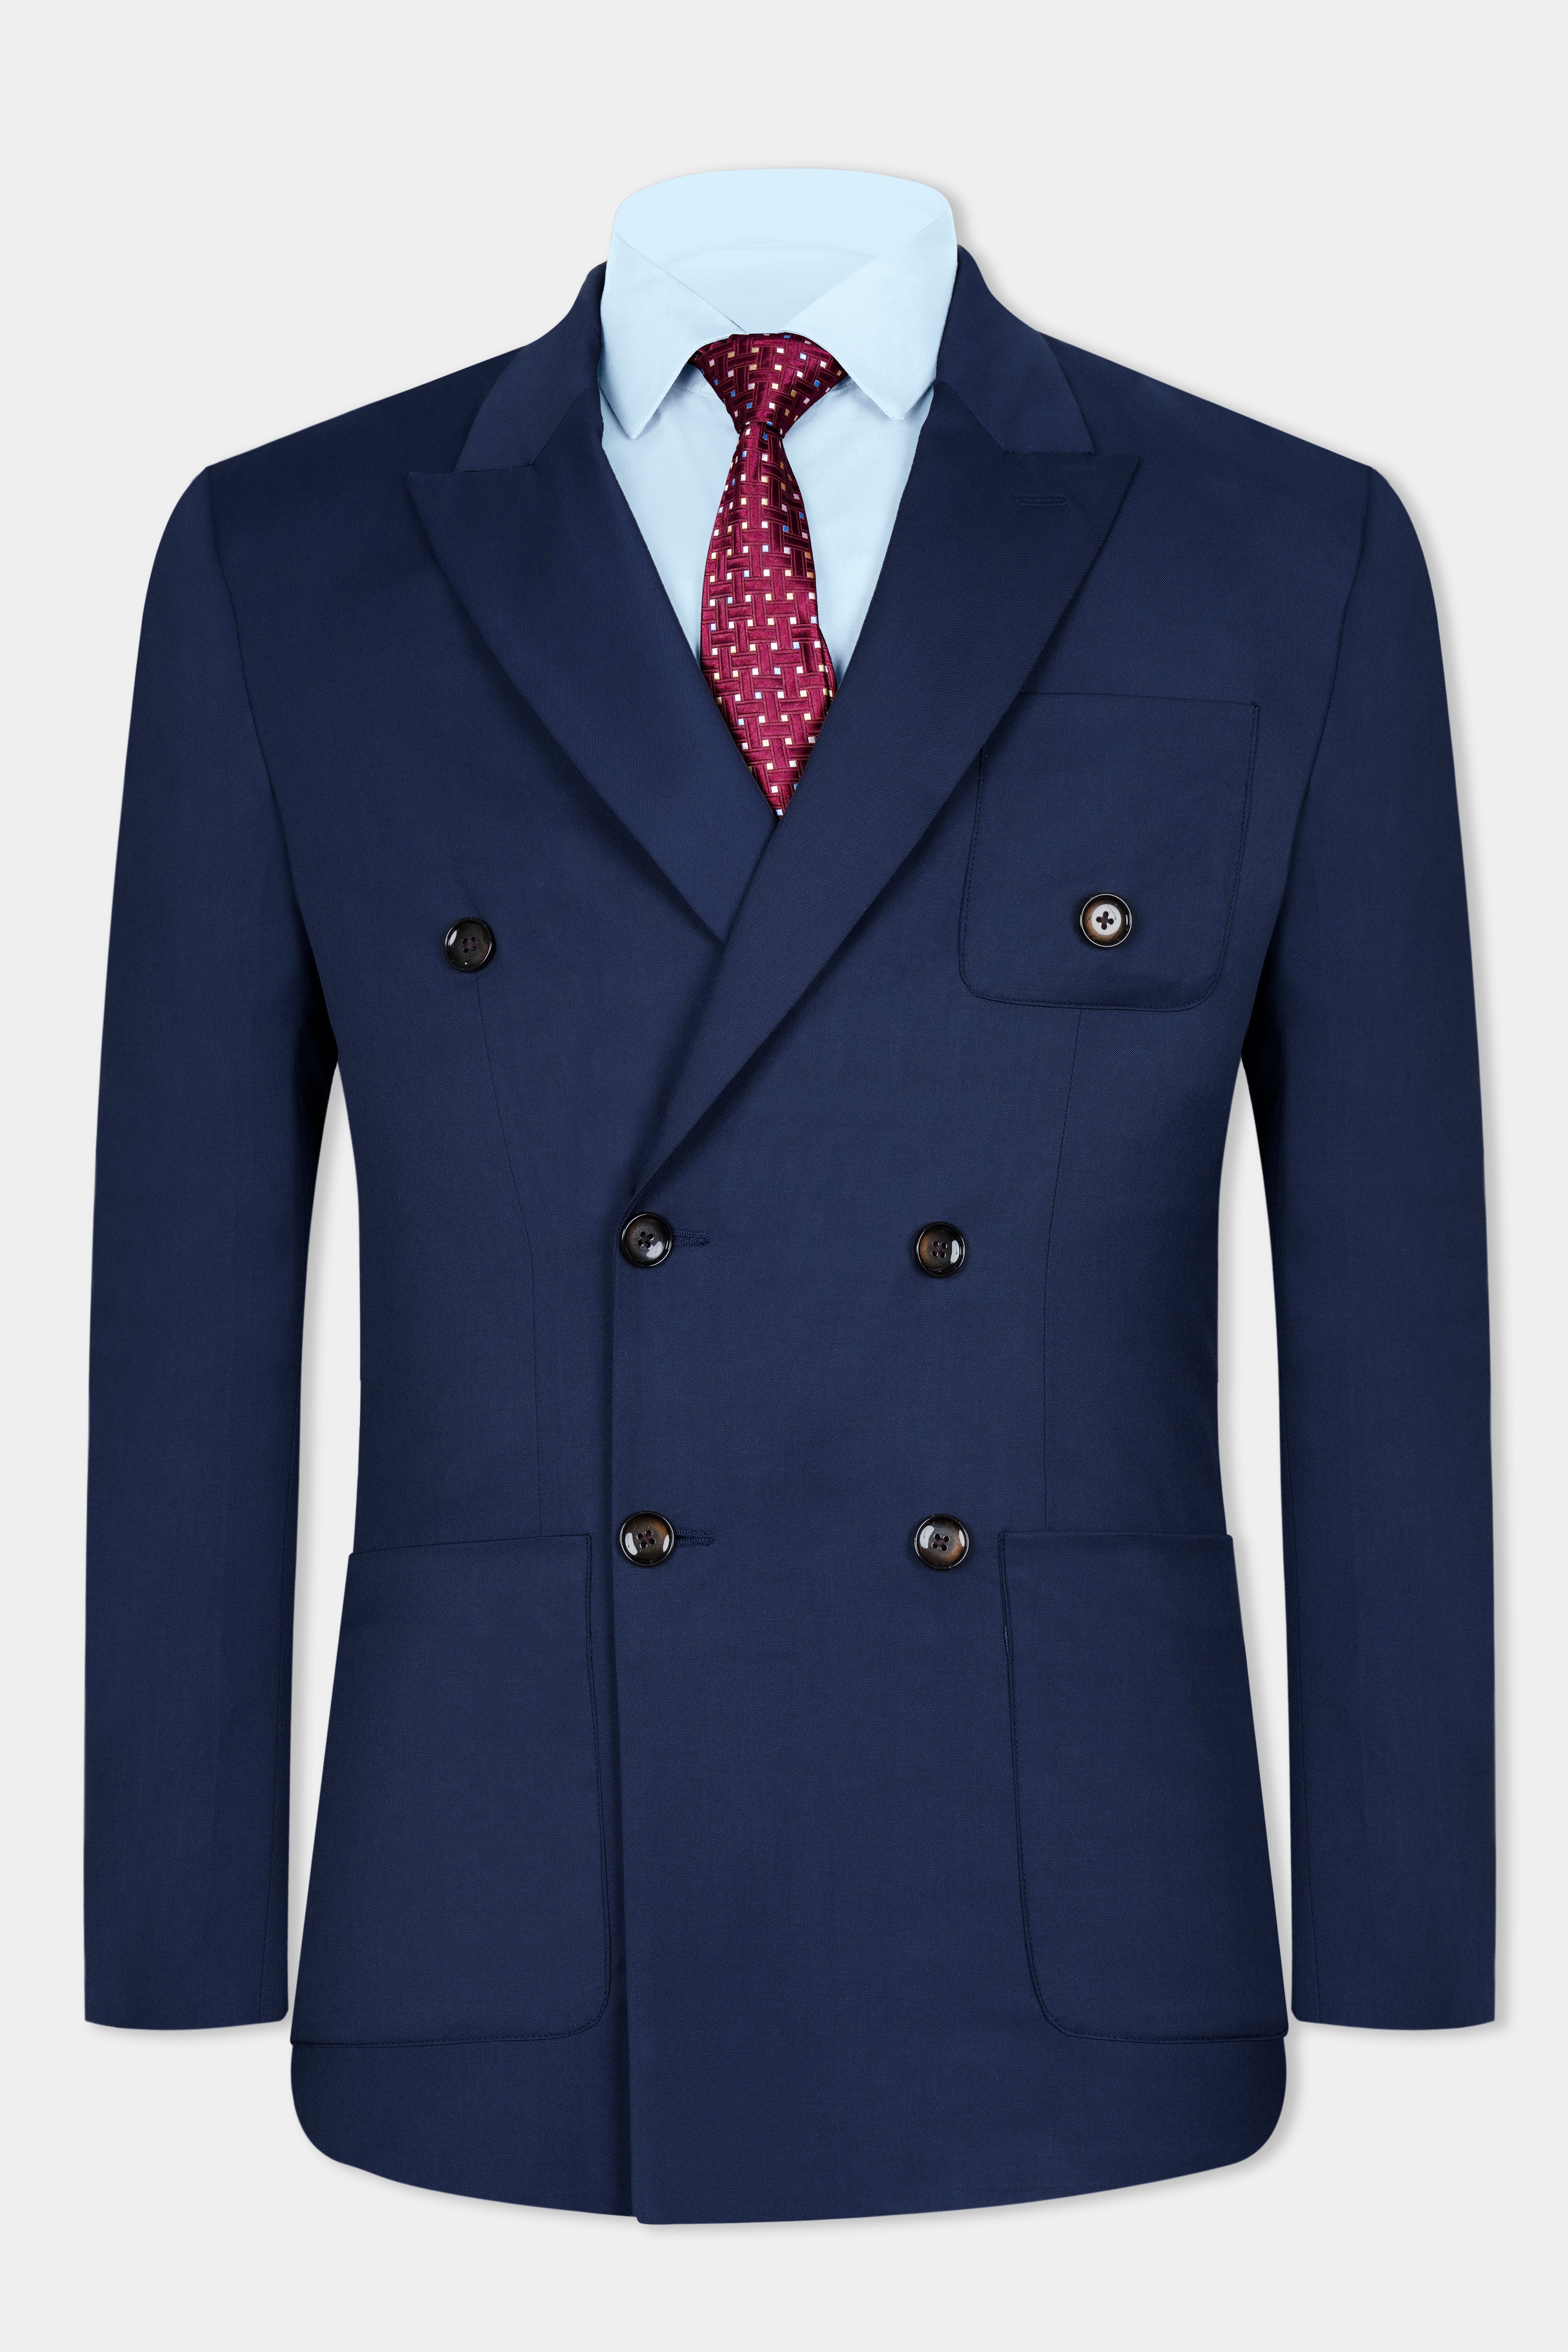 Cloud Burst Blue Wool Rich Double Breasted Sports Blazer BL3075-DB-PP-36, BL3075-DB-PP-38, BL3075-DB-PP-40, BL3075-DB-PP-42, BL3075-DB-PP-44, BL3075-DB-PP-46, BL3075-DB-PP-48, BL3075-DB-PP-50, BL3075-DB-PP-52, BL3075-DB-PP-54, BL3075-DB-PP-56, BL3075-DB-PP-58, BL3075-DB-PP-60